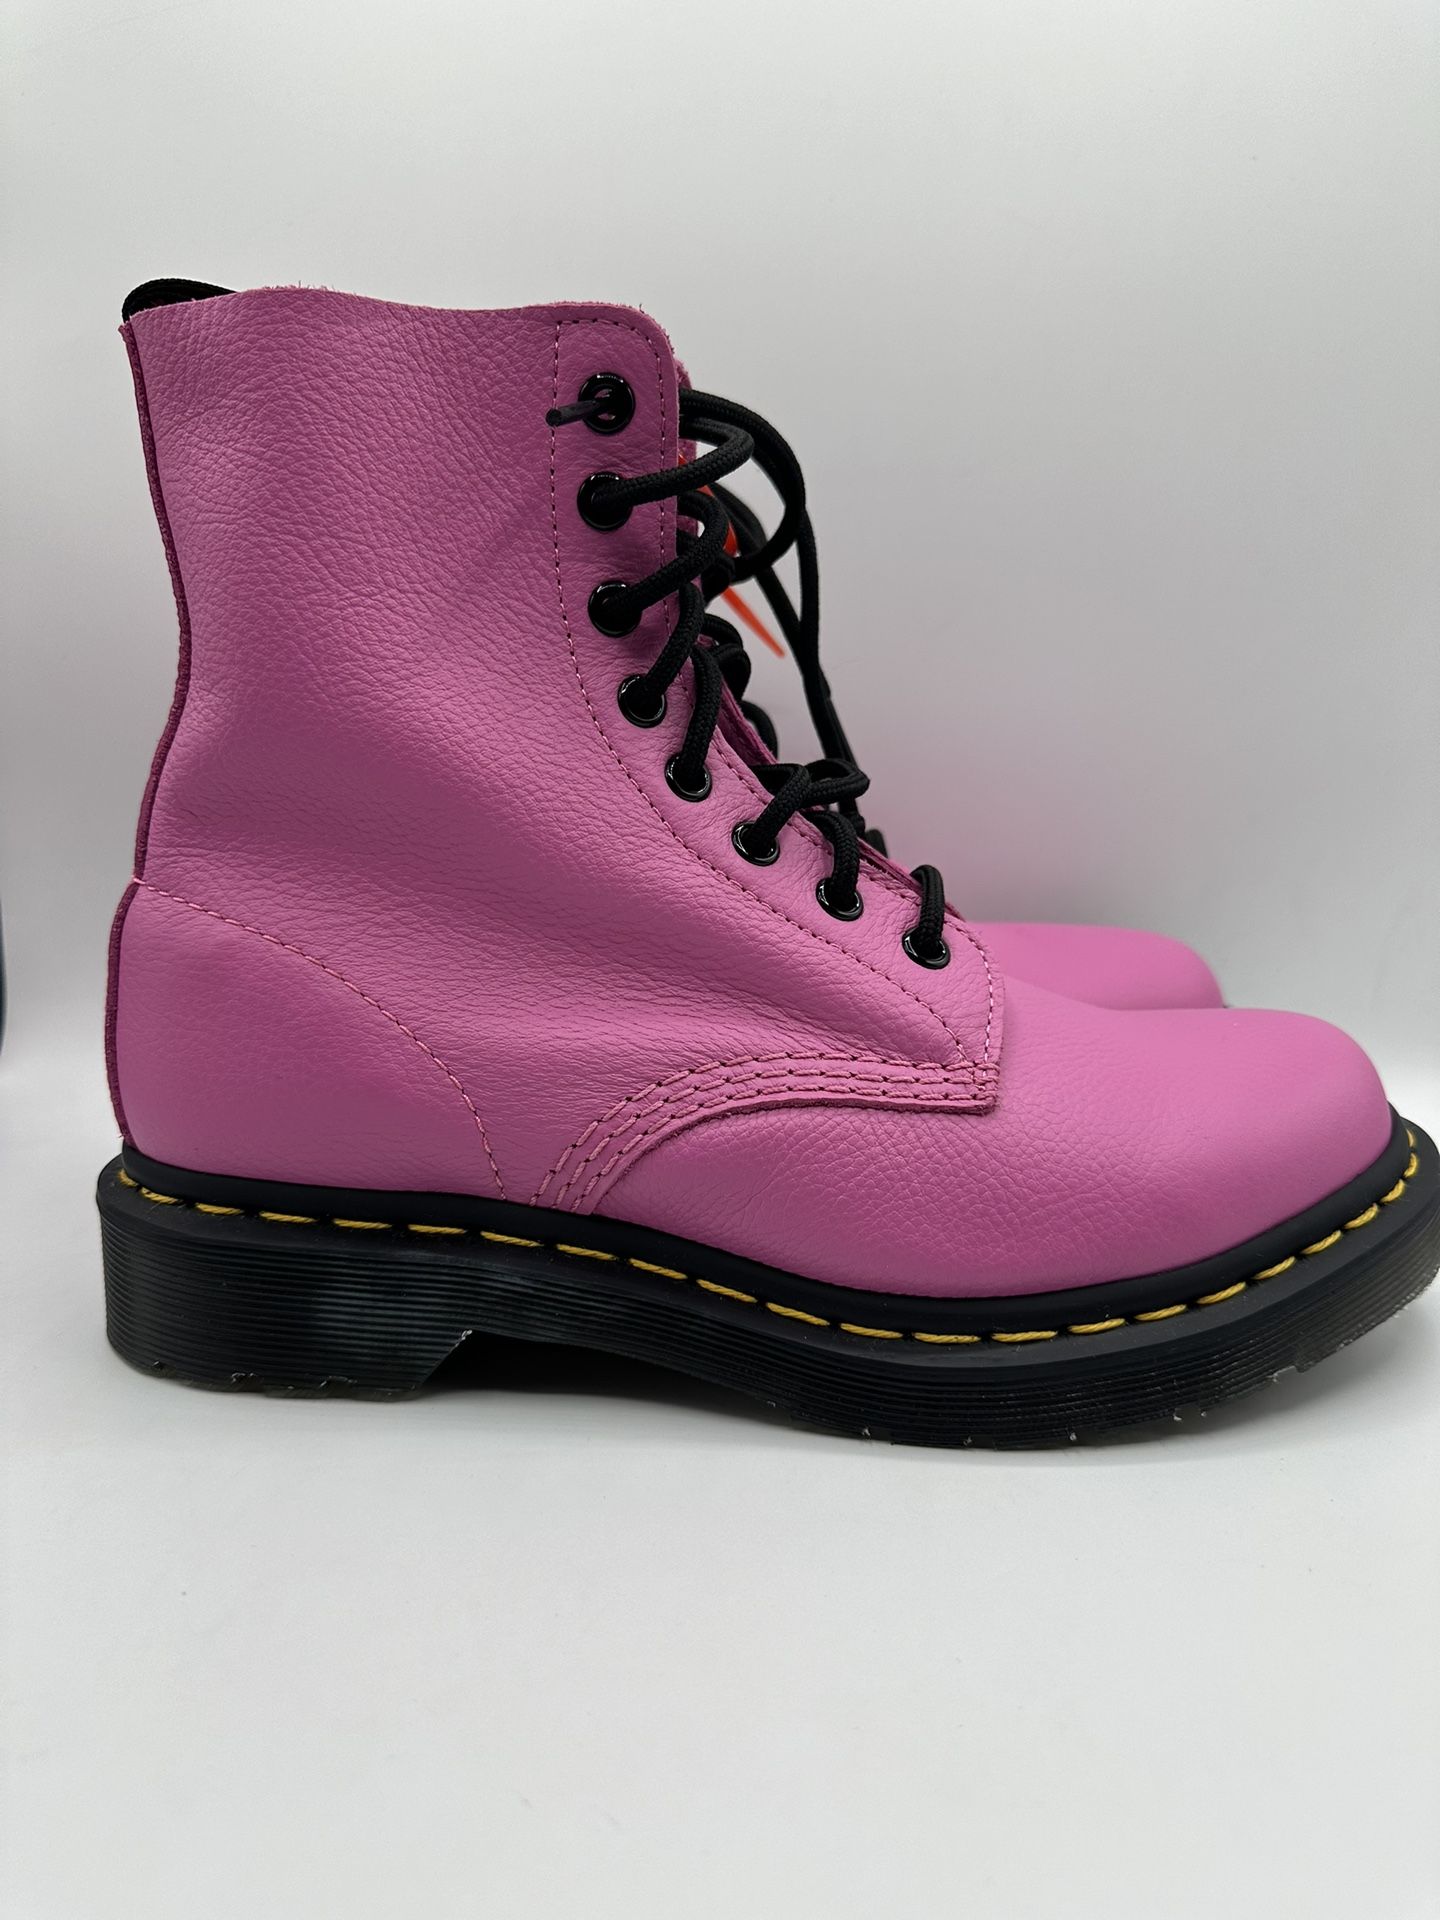 Dr. Martens Pink Lace Up Boots Brand New